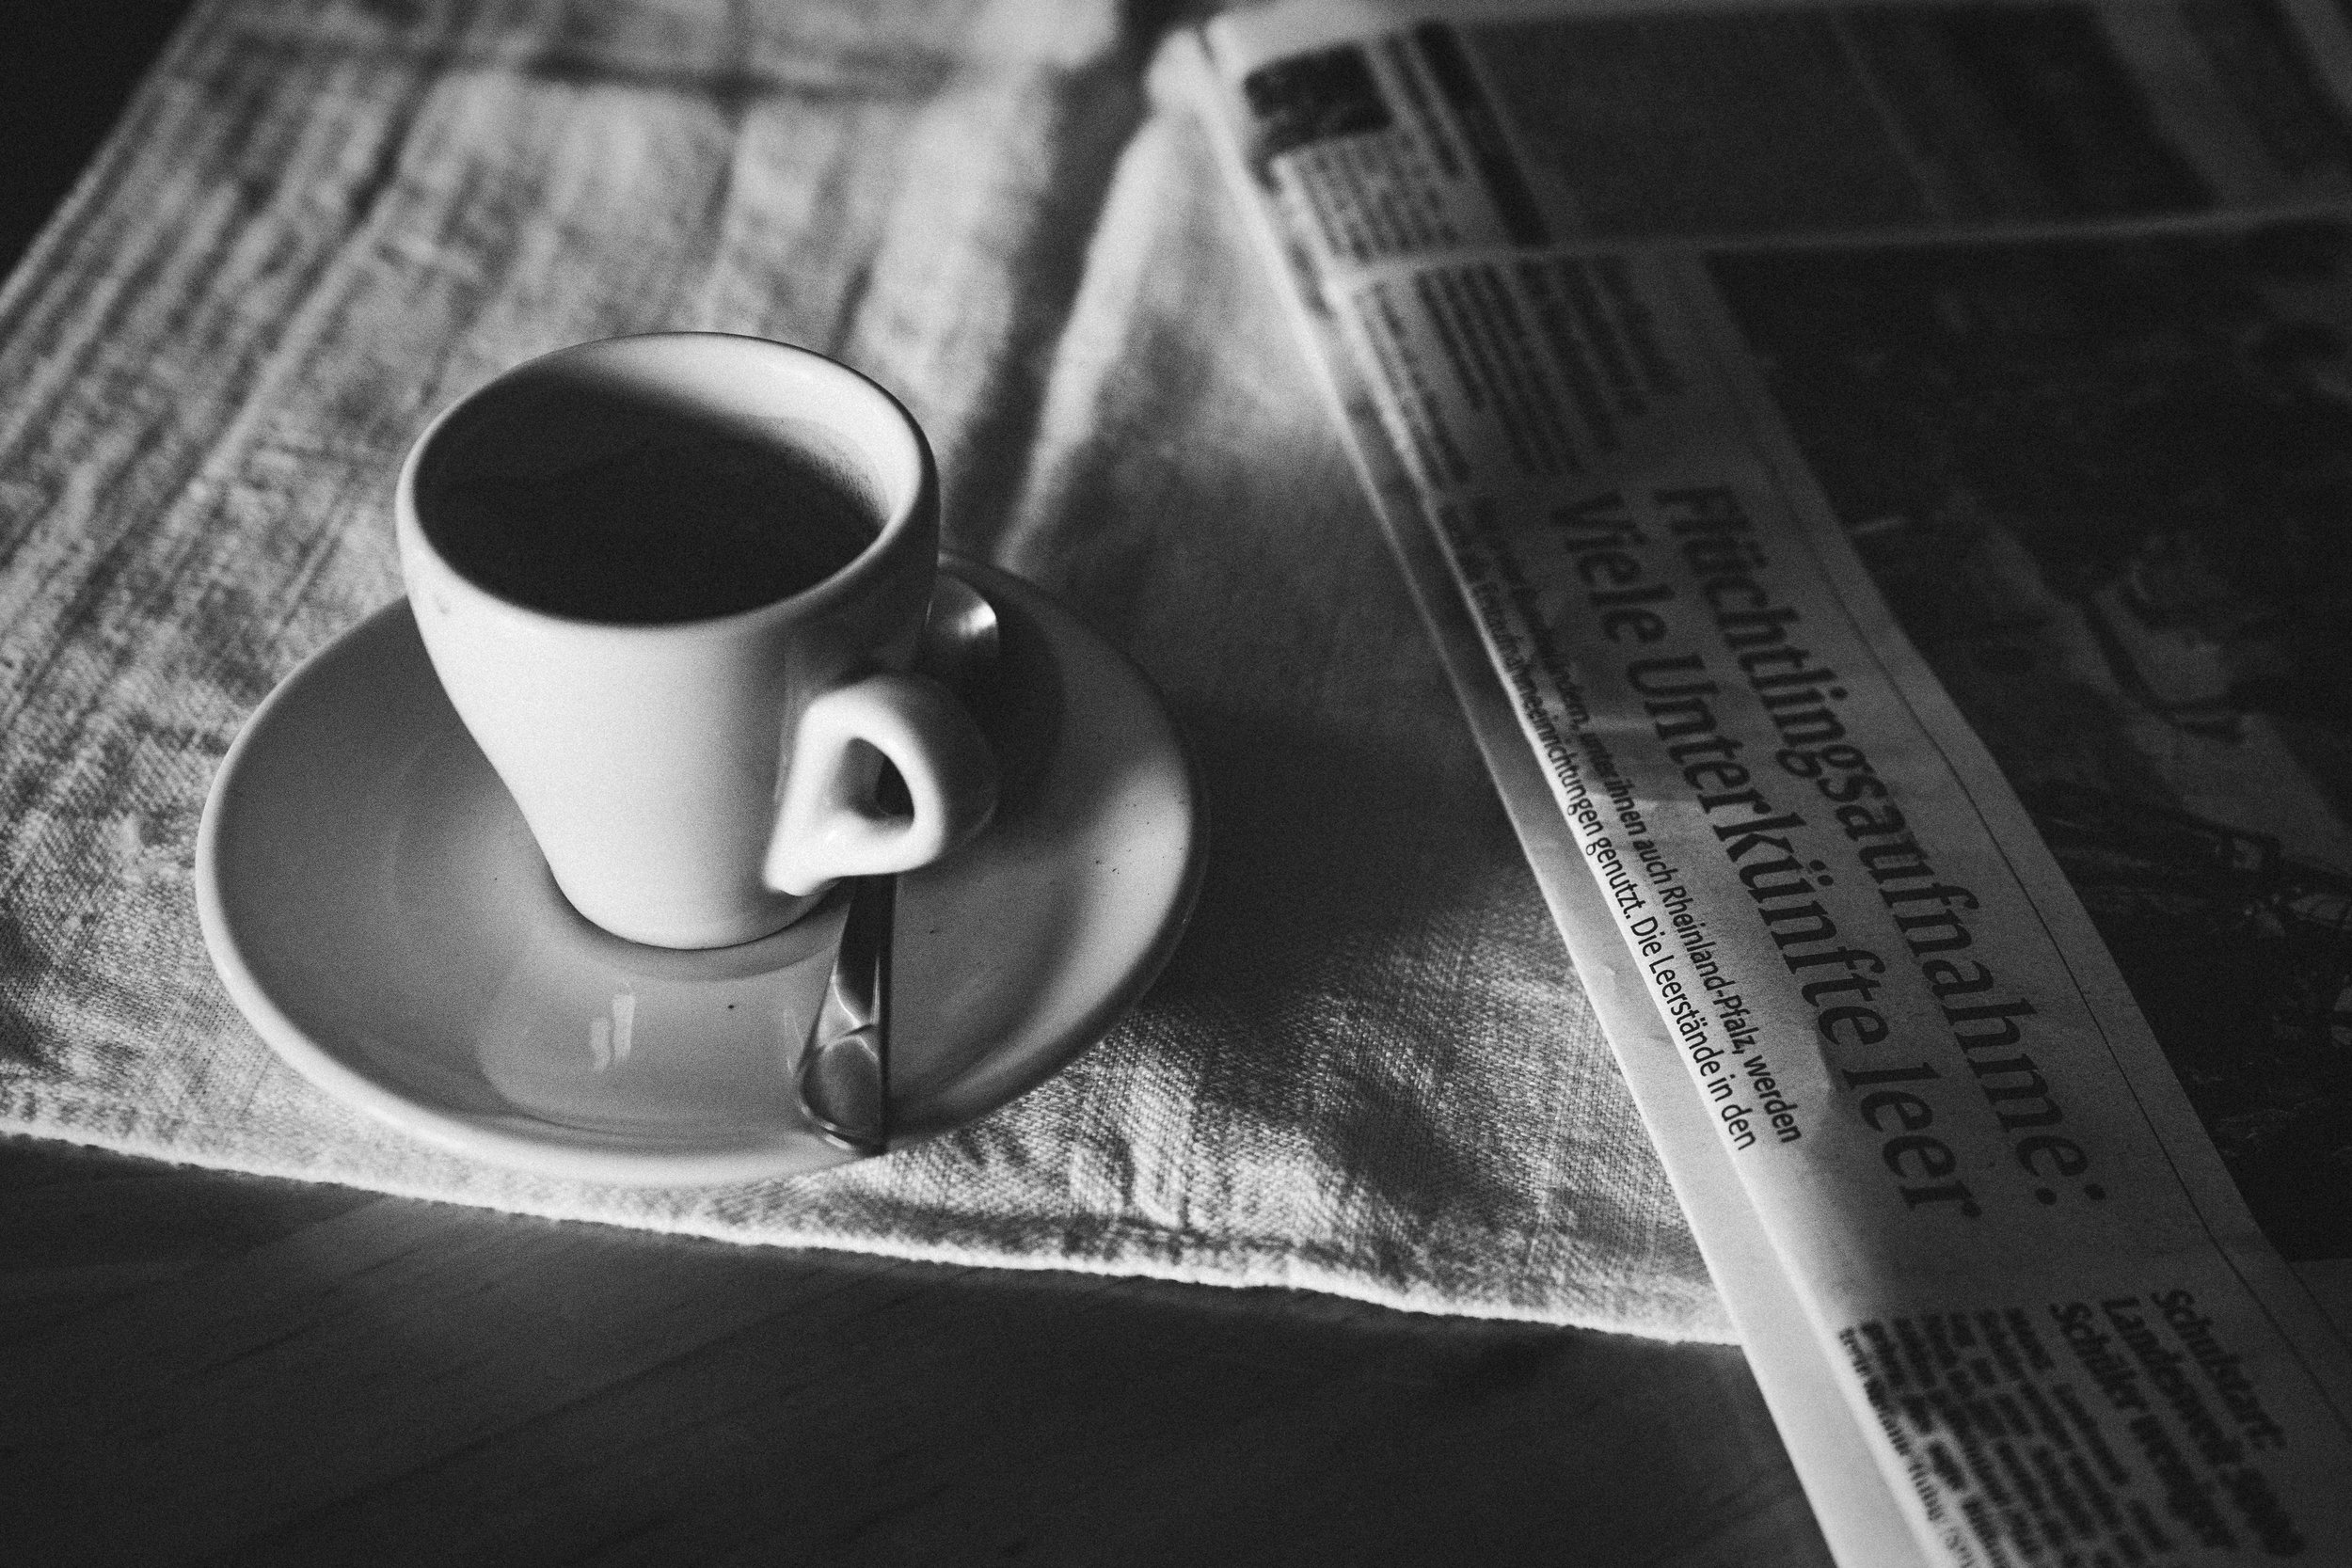 An espresso cup sits on a tablecloth next to a folded newspaper